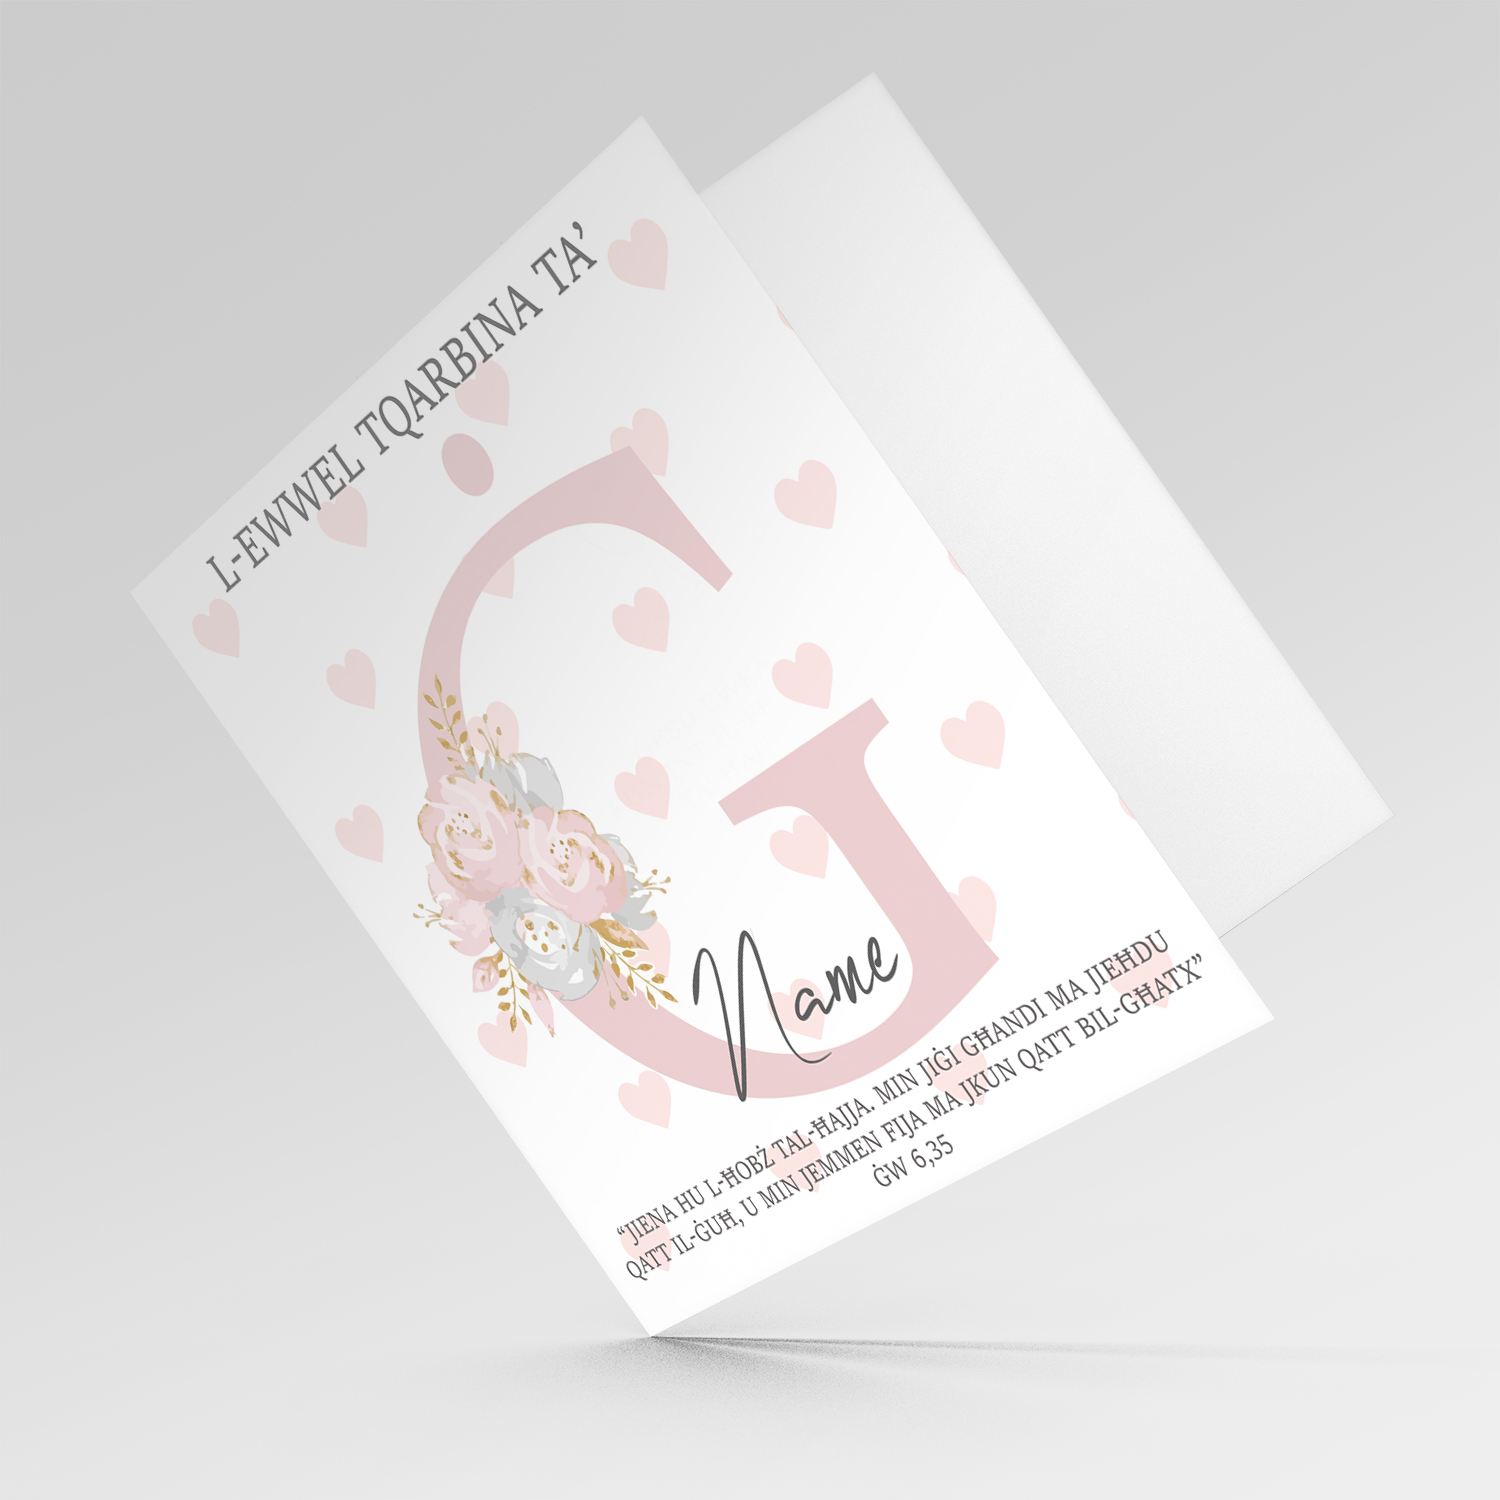 Ġ - Initial First Holy Communion Card for Girls, with bible verse ĠW 6,35  and light pink heart background in Maltese | Witty Creations